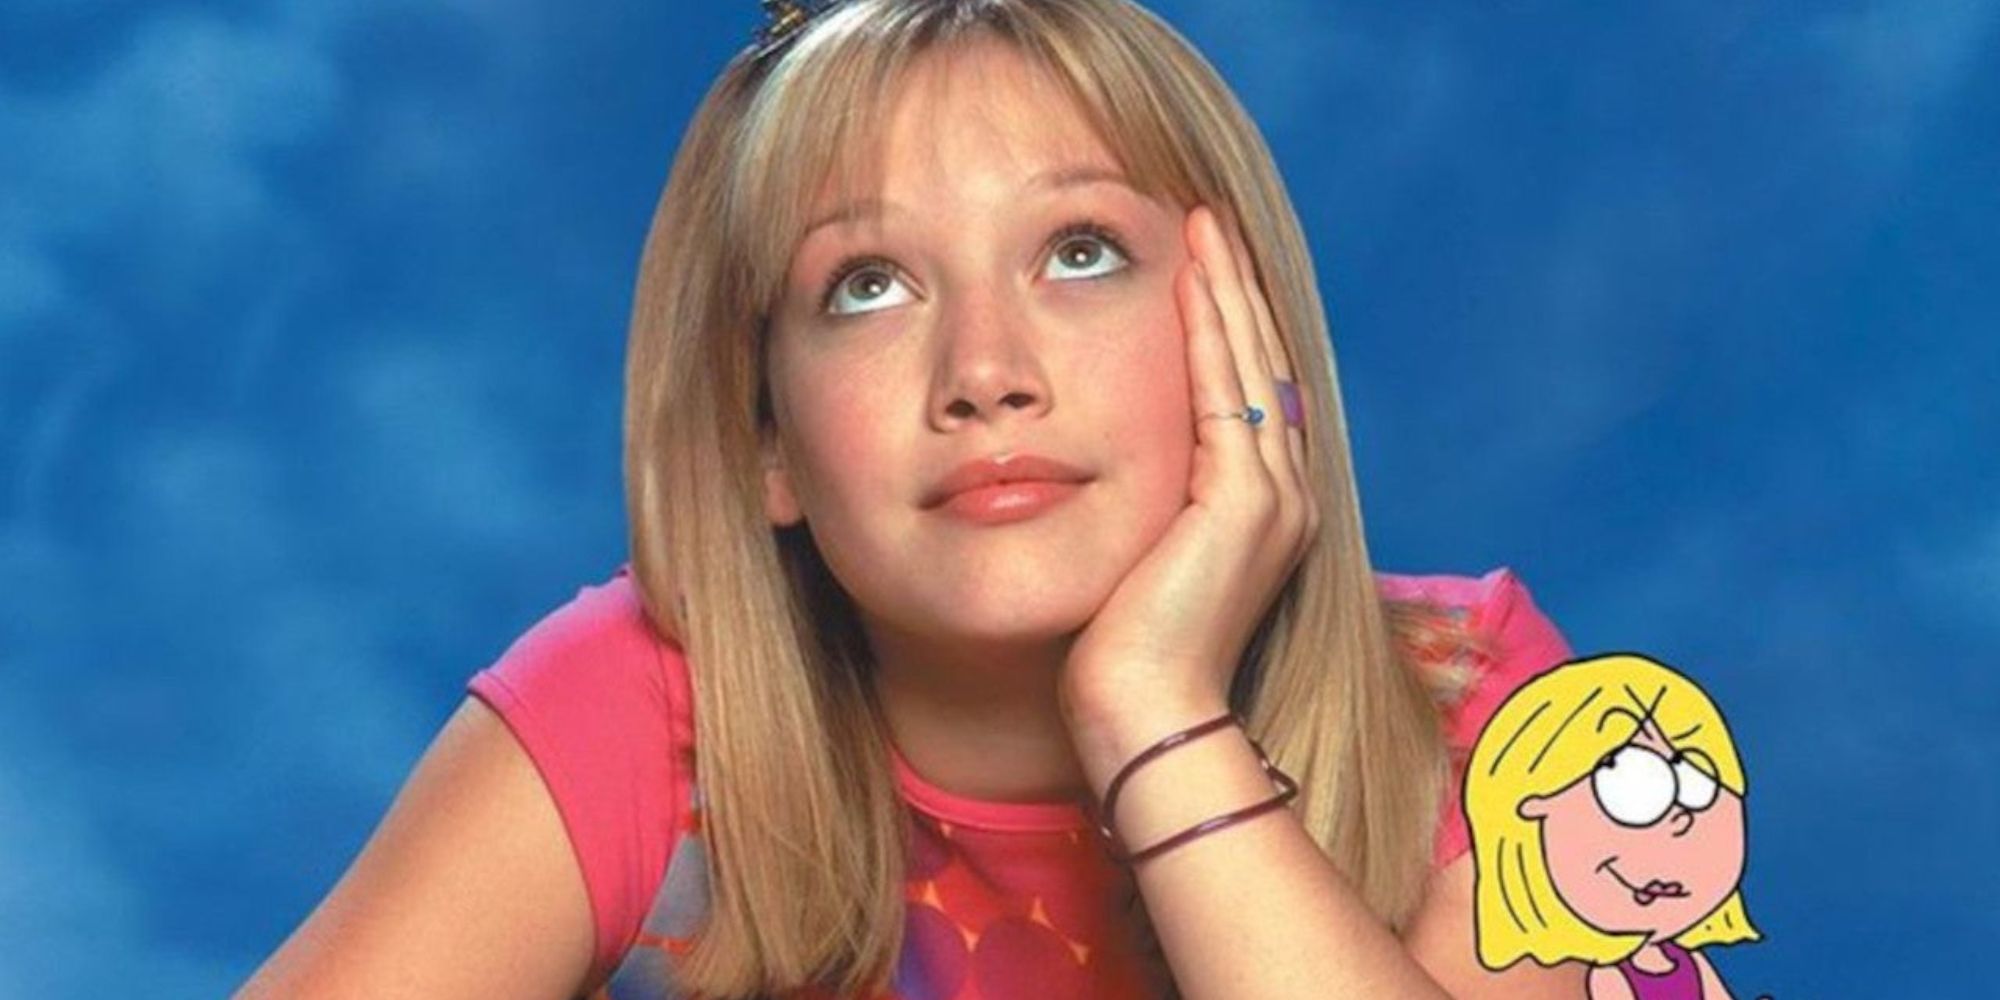 Screenshot of Lizzie McGuire from the show of the same name.